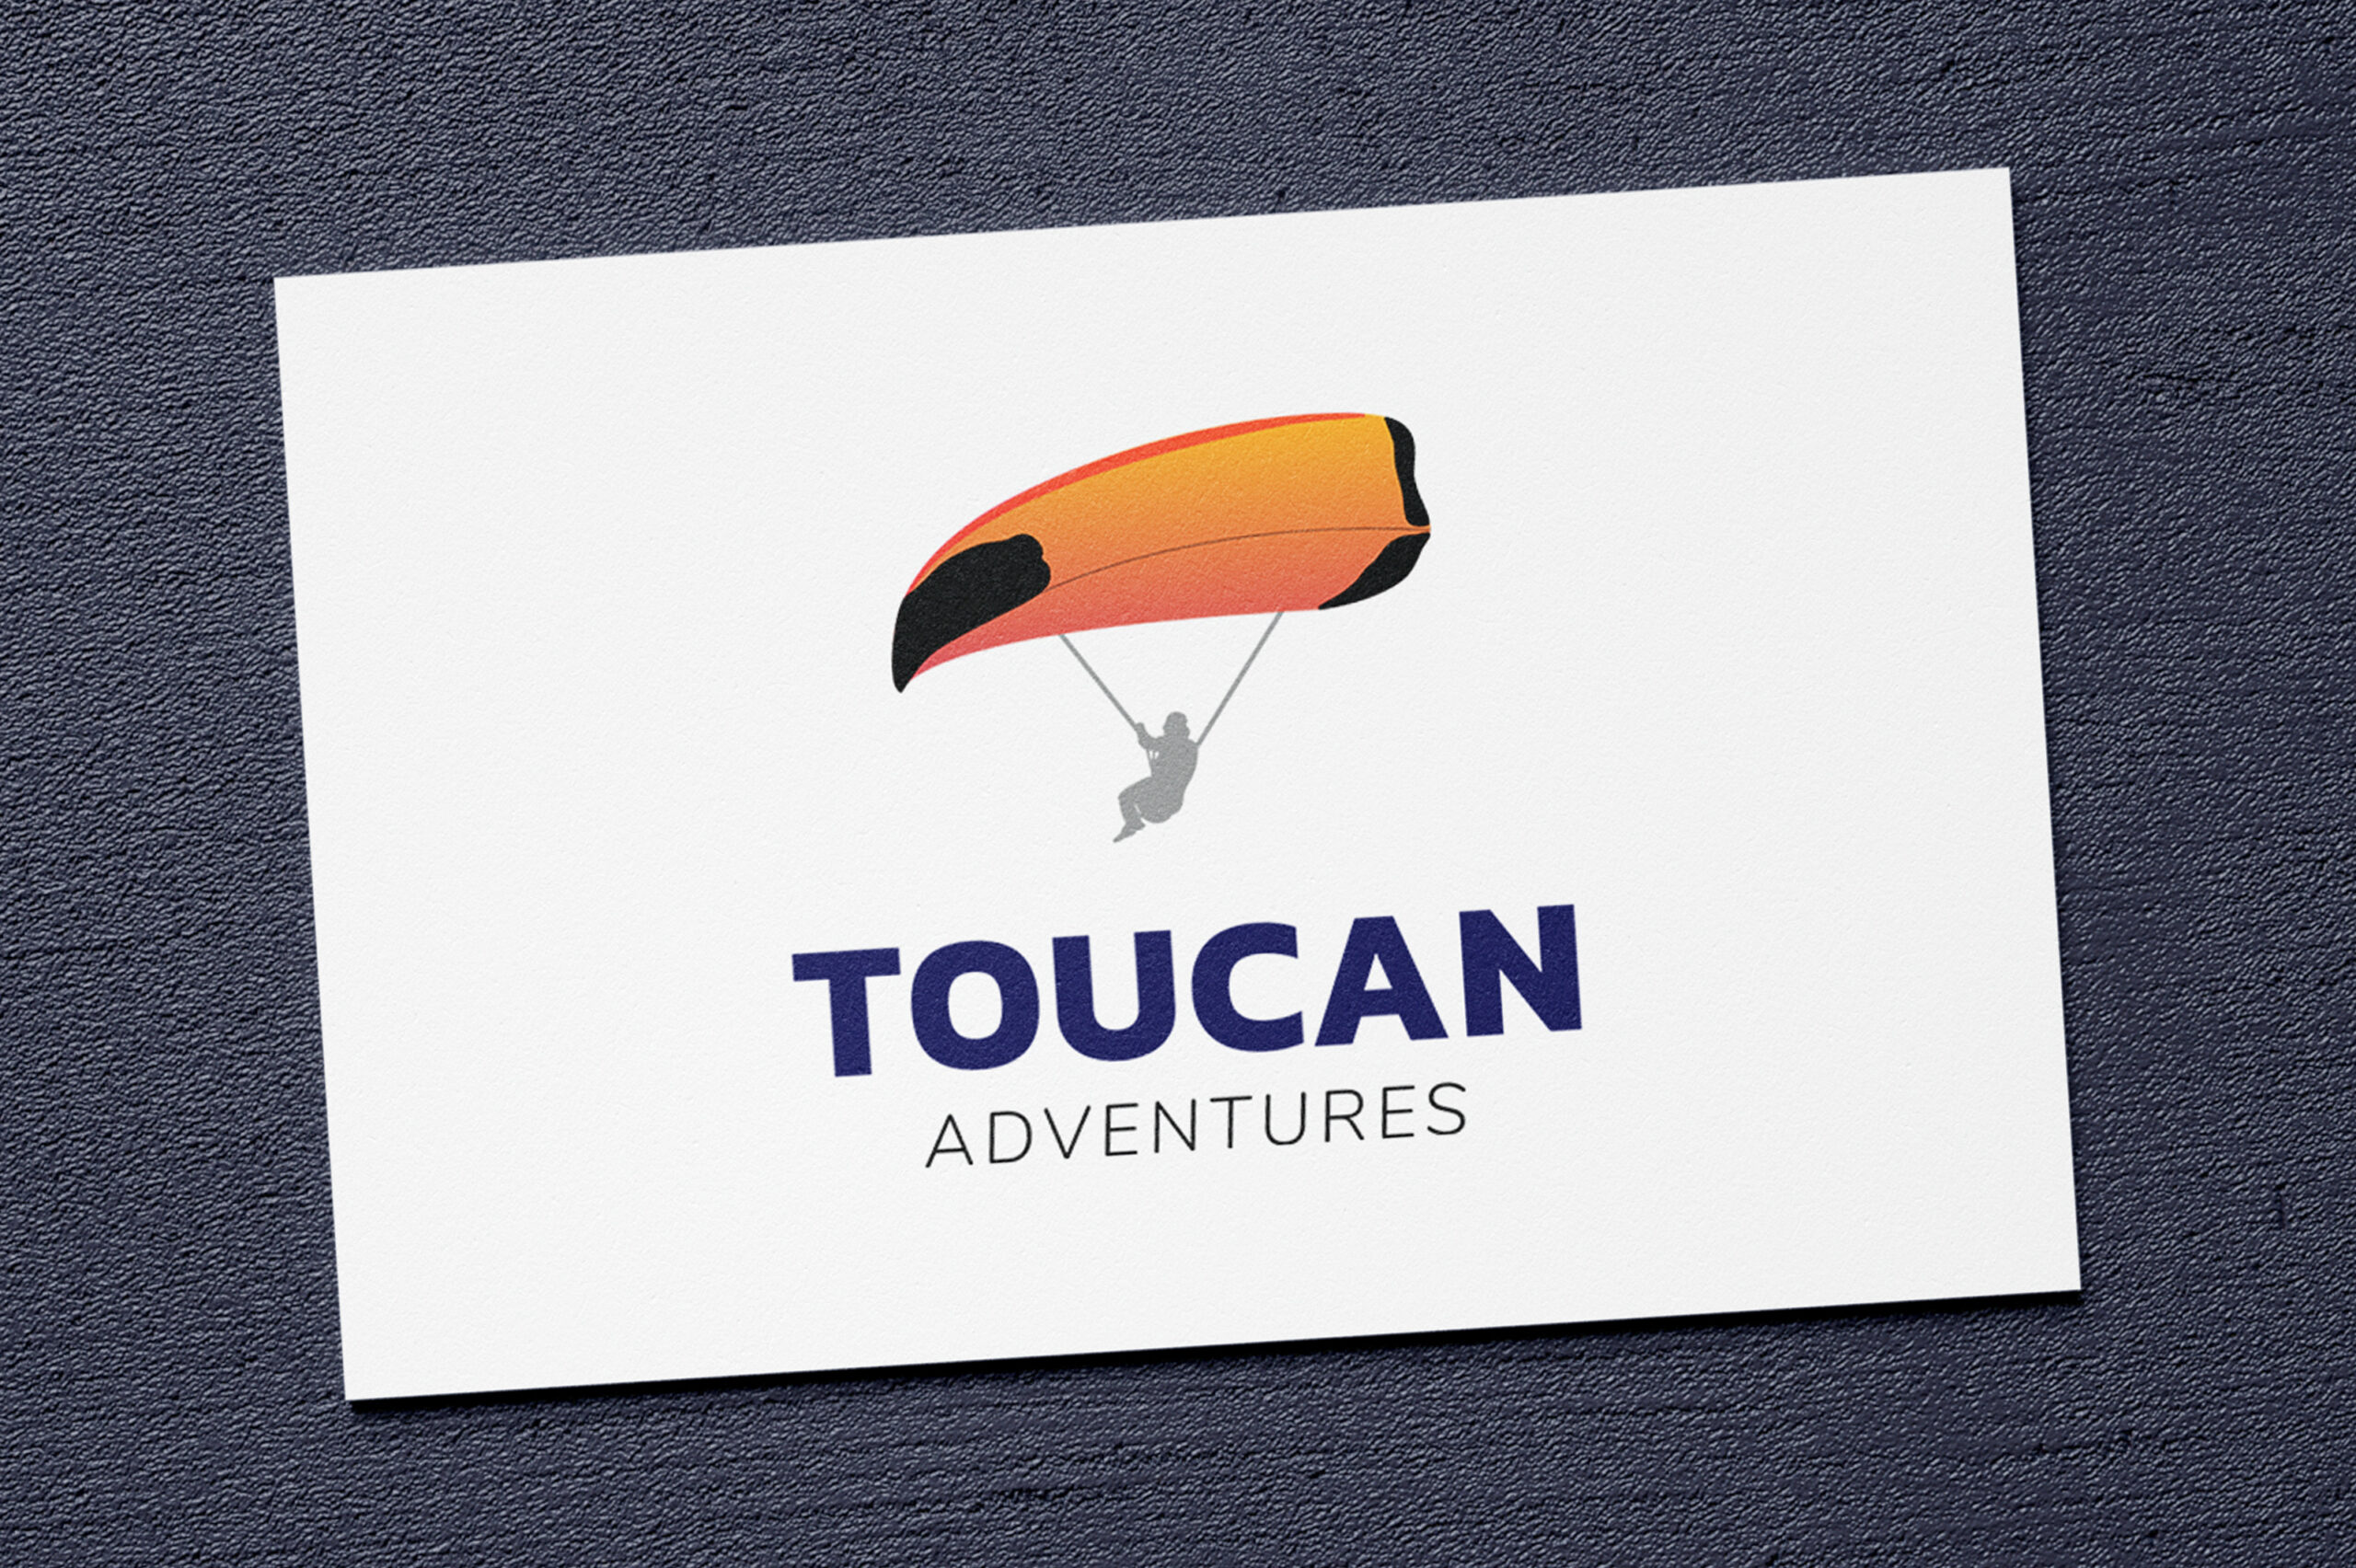 Toucan Adventures - a local holiday activity company